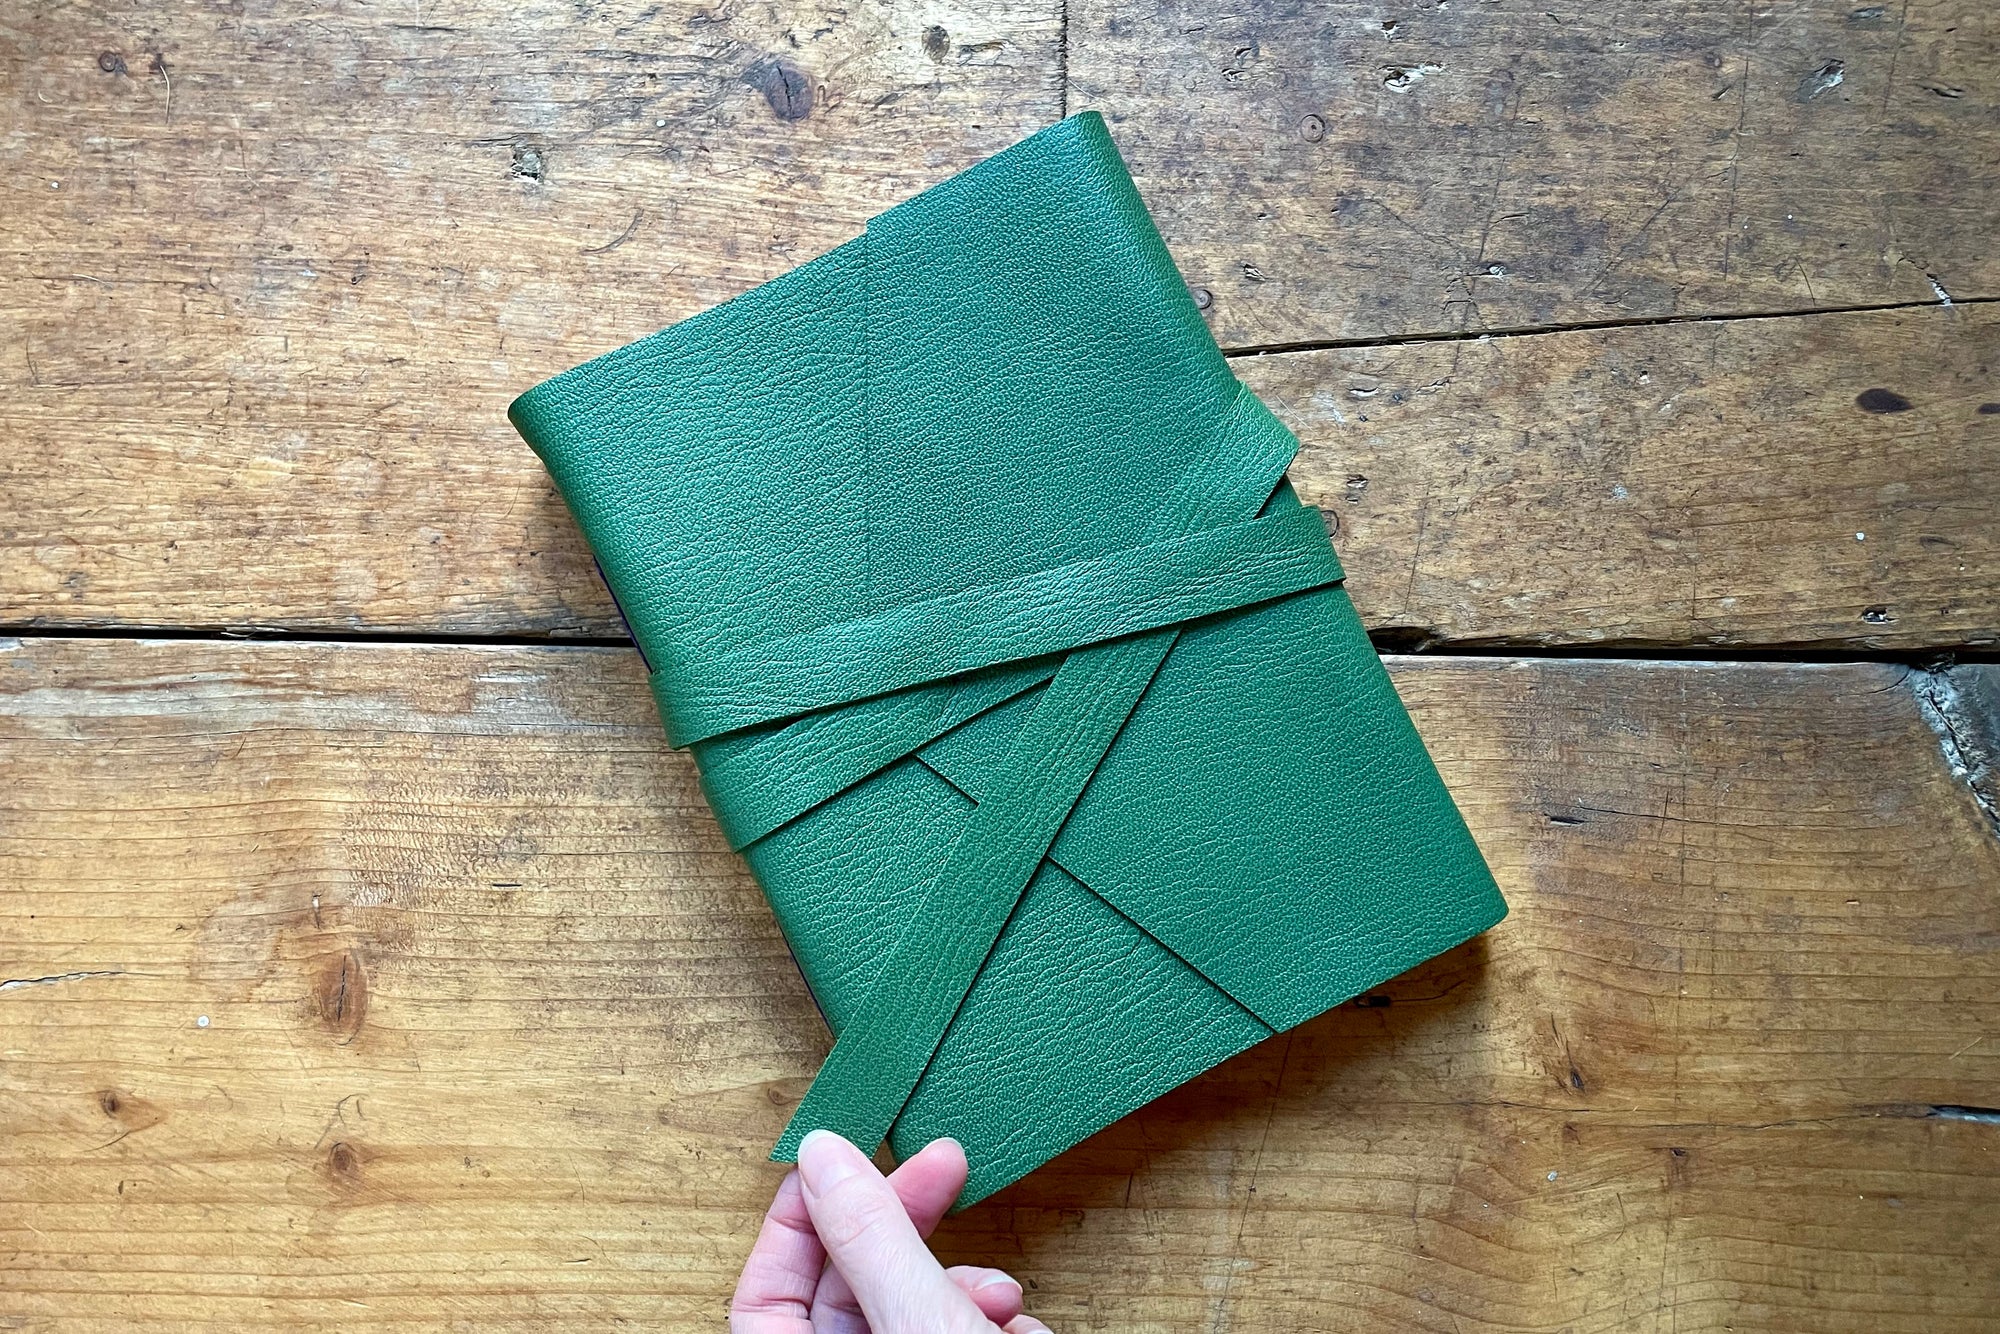 This sketchbook is held securely closed with a matching leather strap that is securely stitched to the cover.